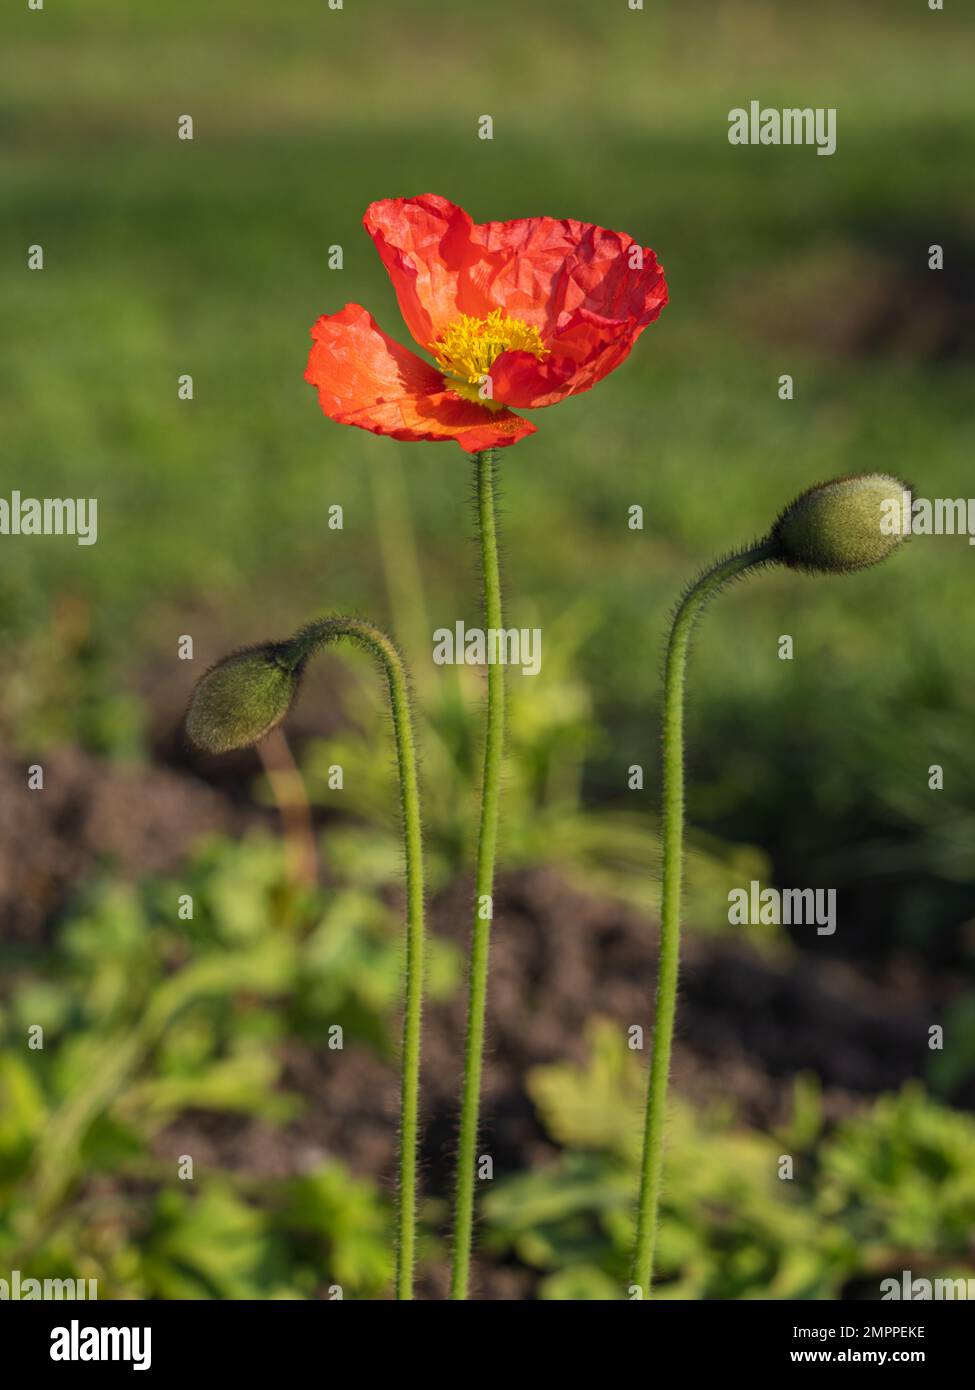 Closeup view of colorful orange red flower of papaver nudicaule aka Iceland poppy blooming in garden outdoors in bright sunlight Stock Photo